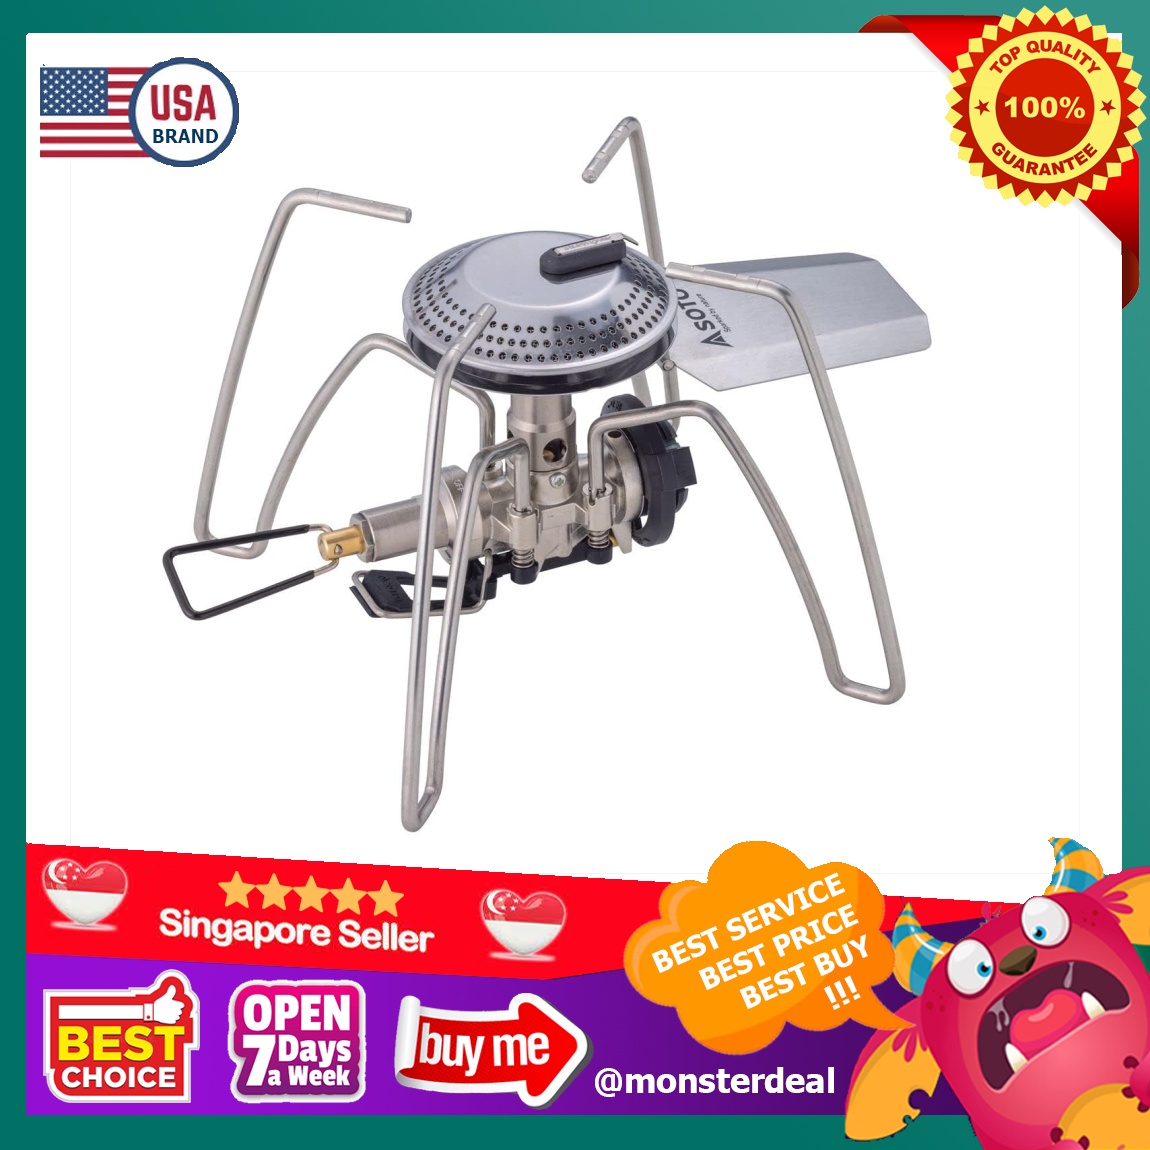  SOTO ST-340 Single Burner with Micro Regulator (High Heat and  Wind Resistant), CB Can, Group, Camping, Regulator Stove, Range, Silver,  Made in Japan : Sports & Outdoors